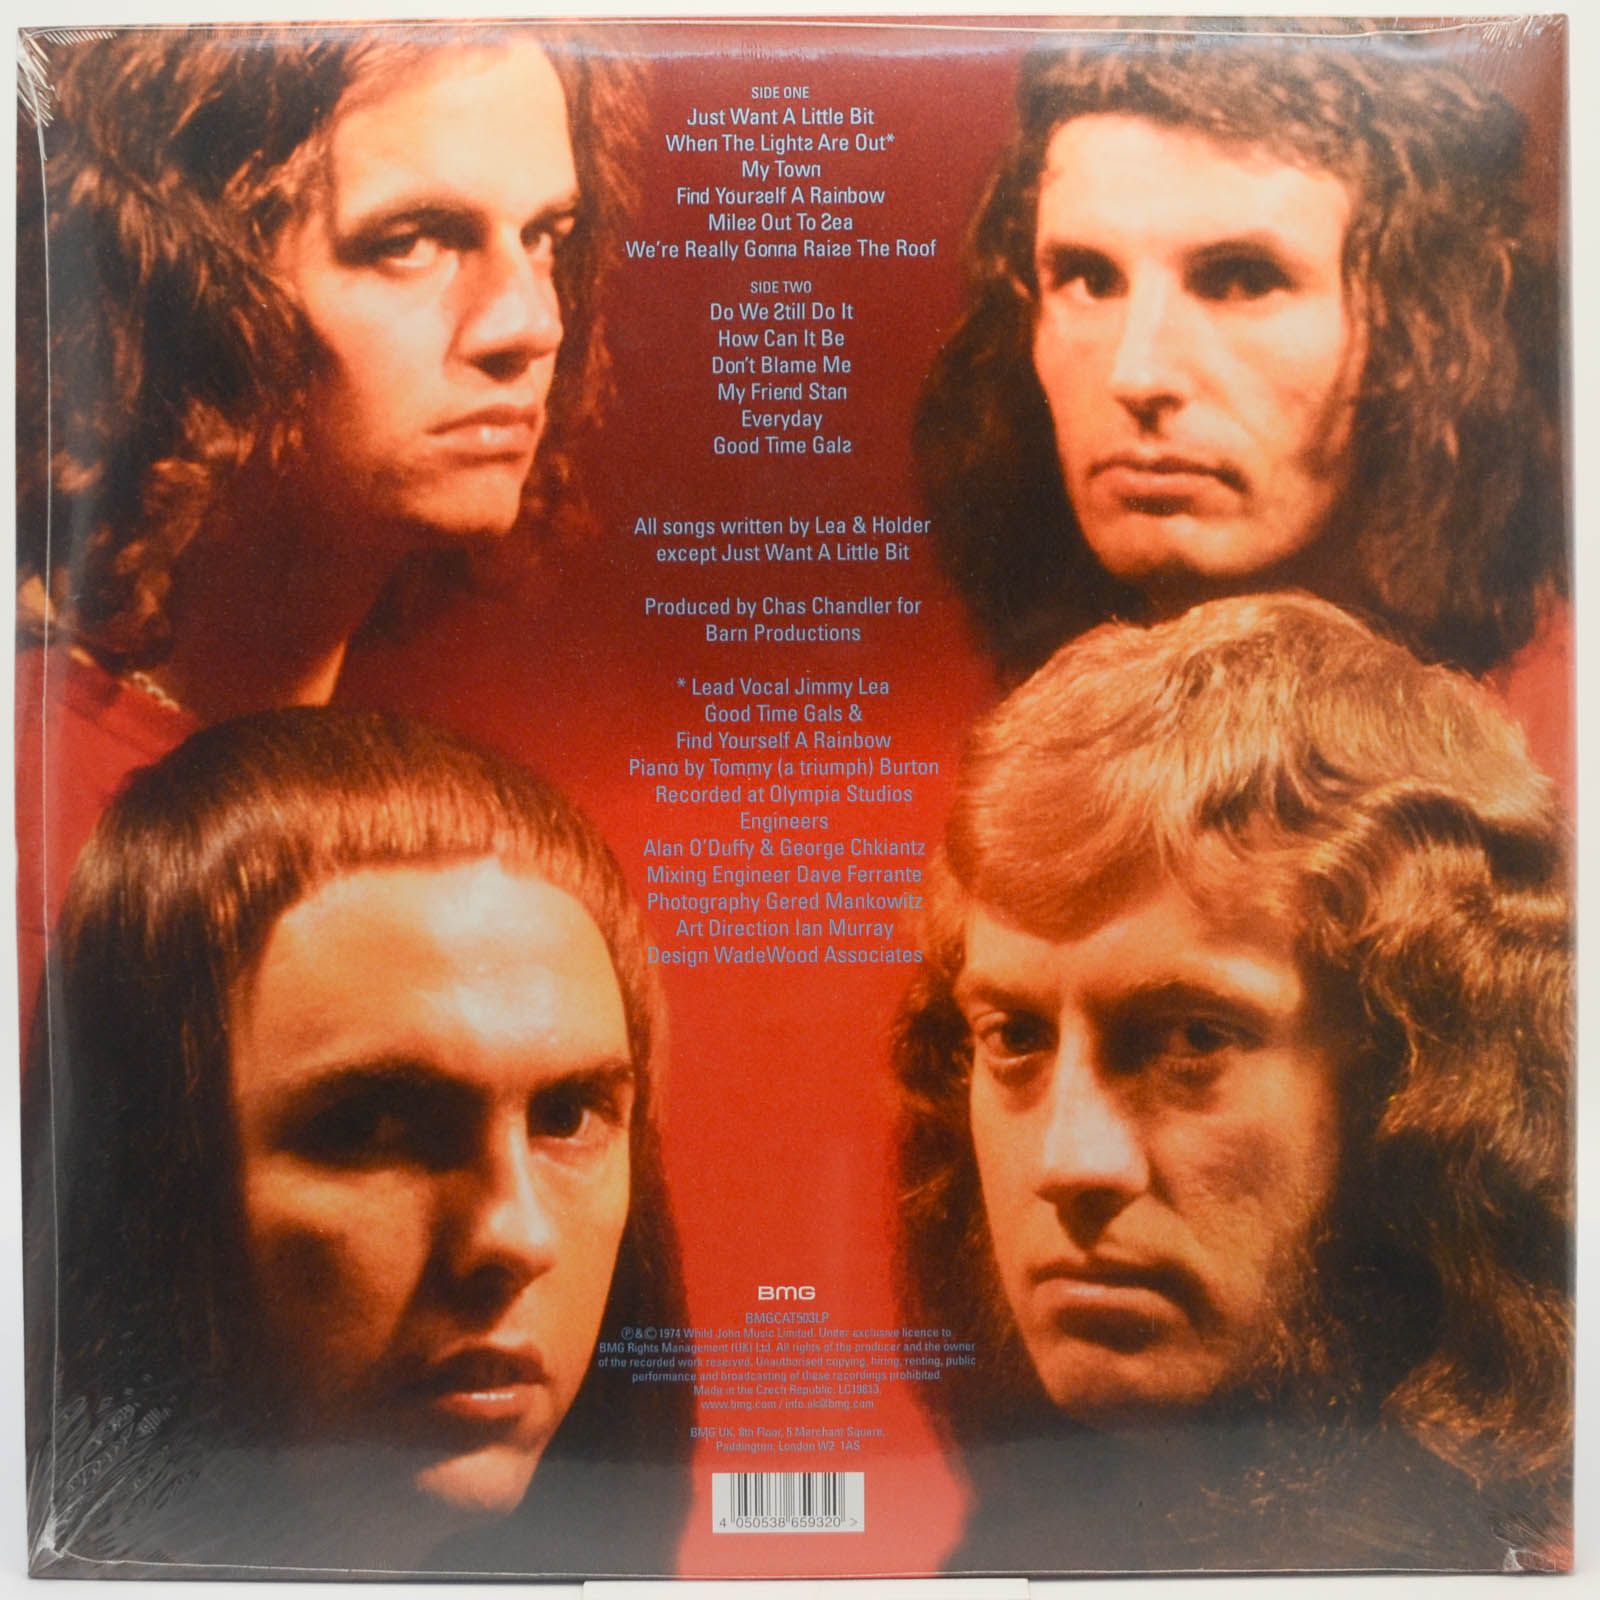 Slade — Old New Borrowed And Blue, 1974